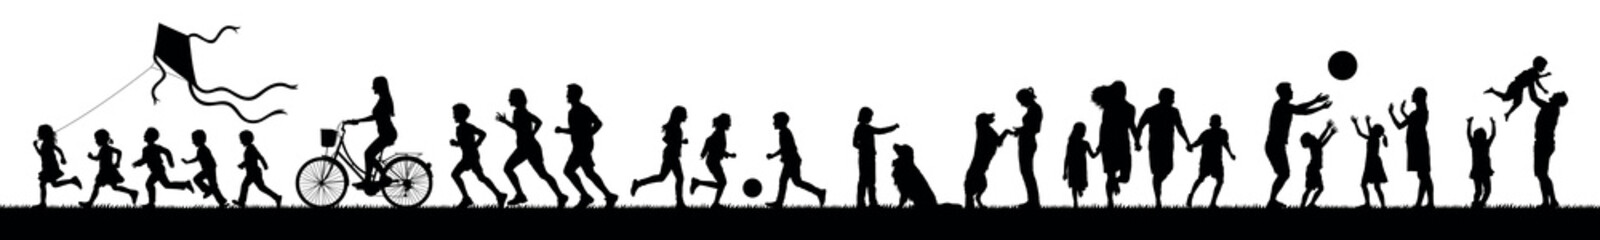 Silhouettes set of group people adult and kids having fun outdoor activities vector. 